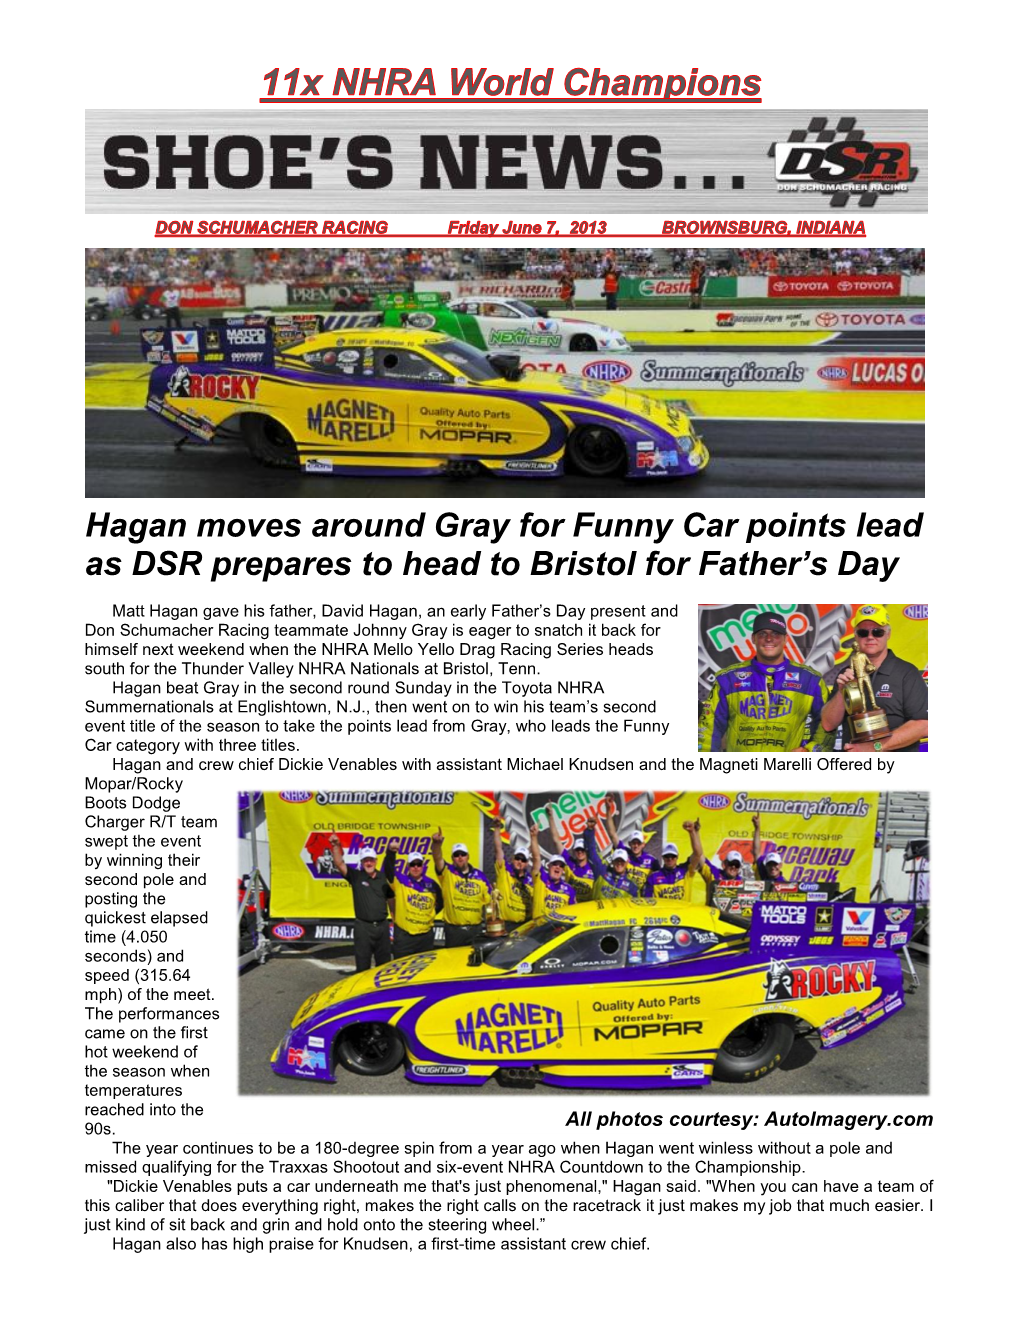 Hagan Moves Around Gray for Funny Car Points Lead As DSR Prepares to Head to Bristol for Father’S Day